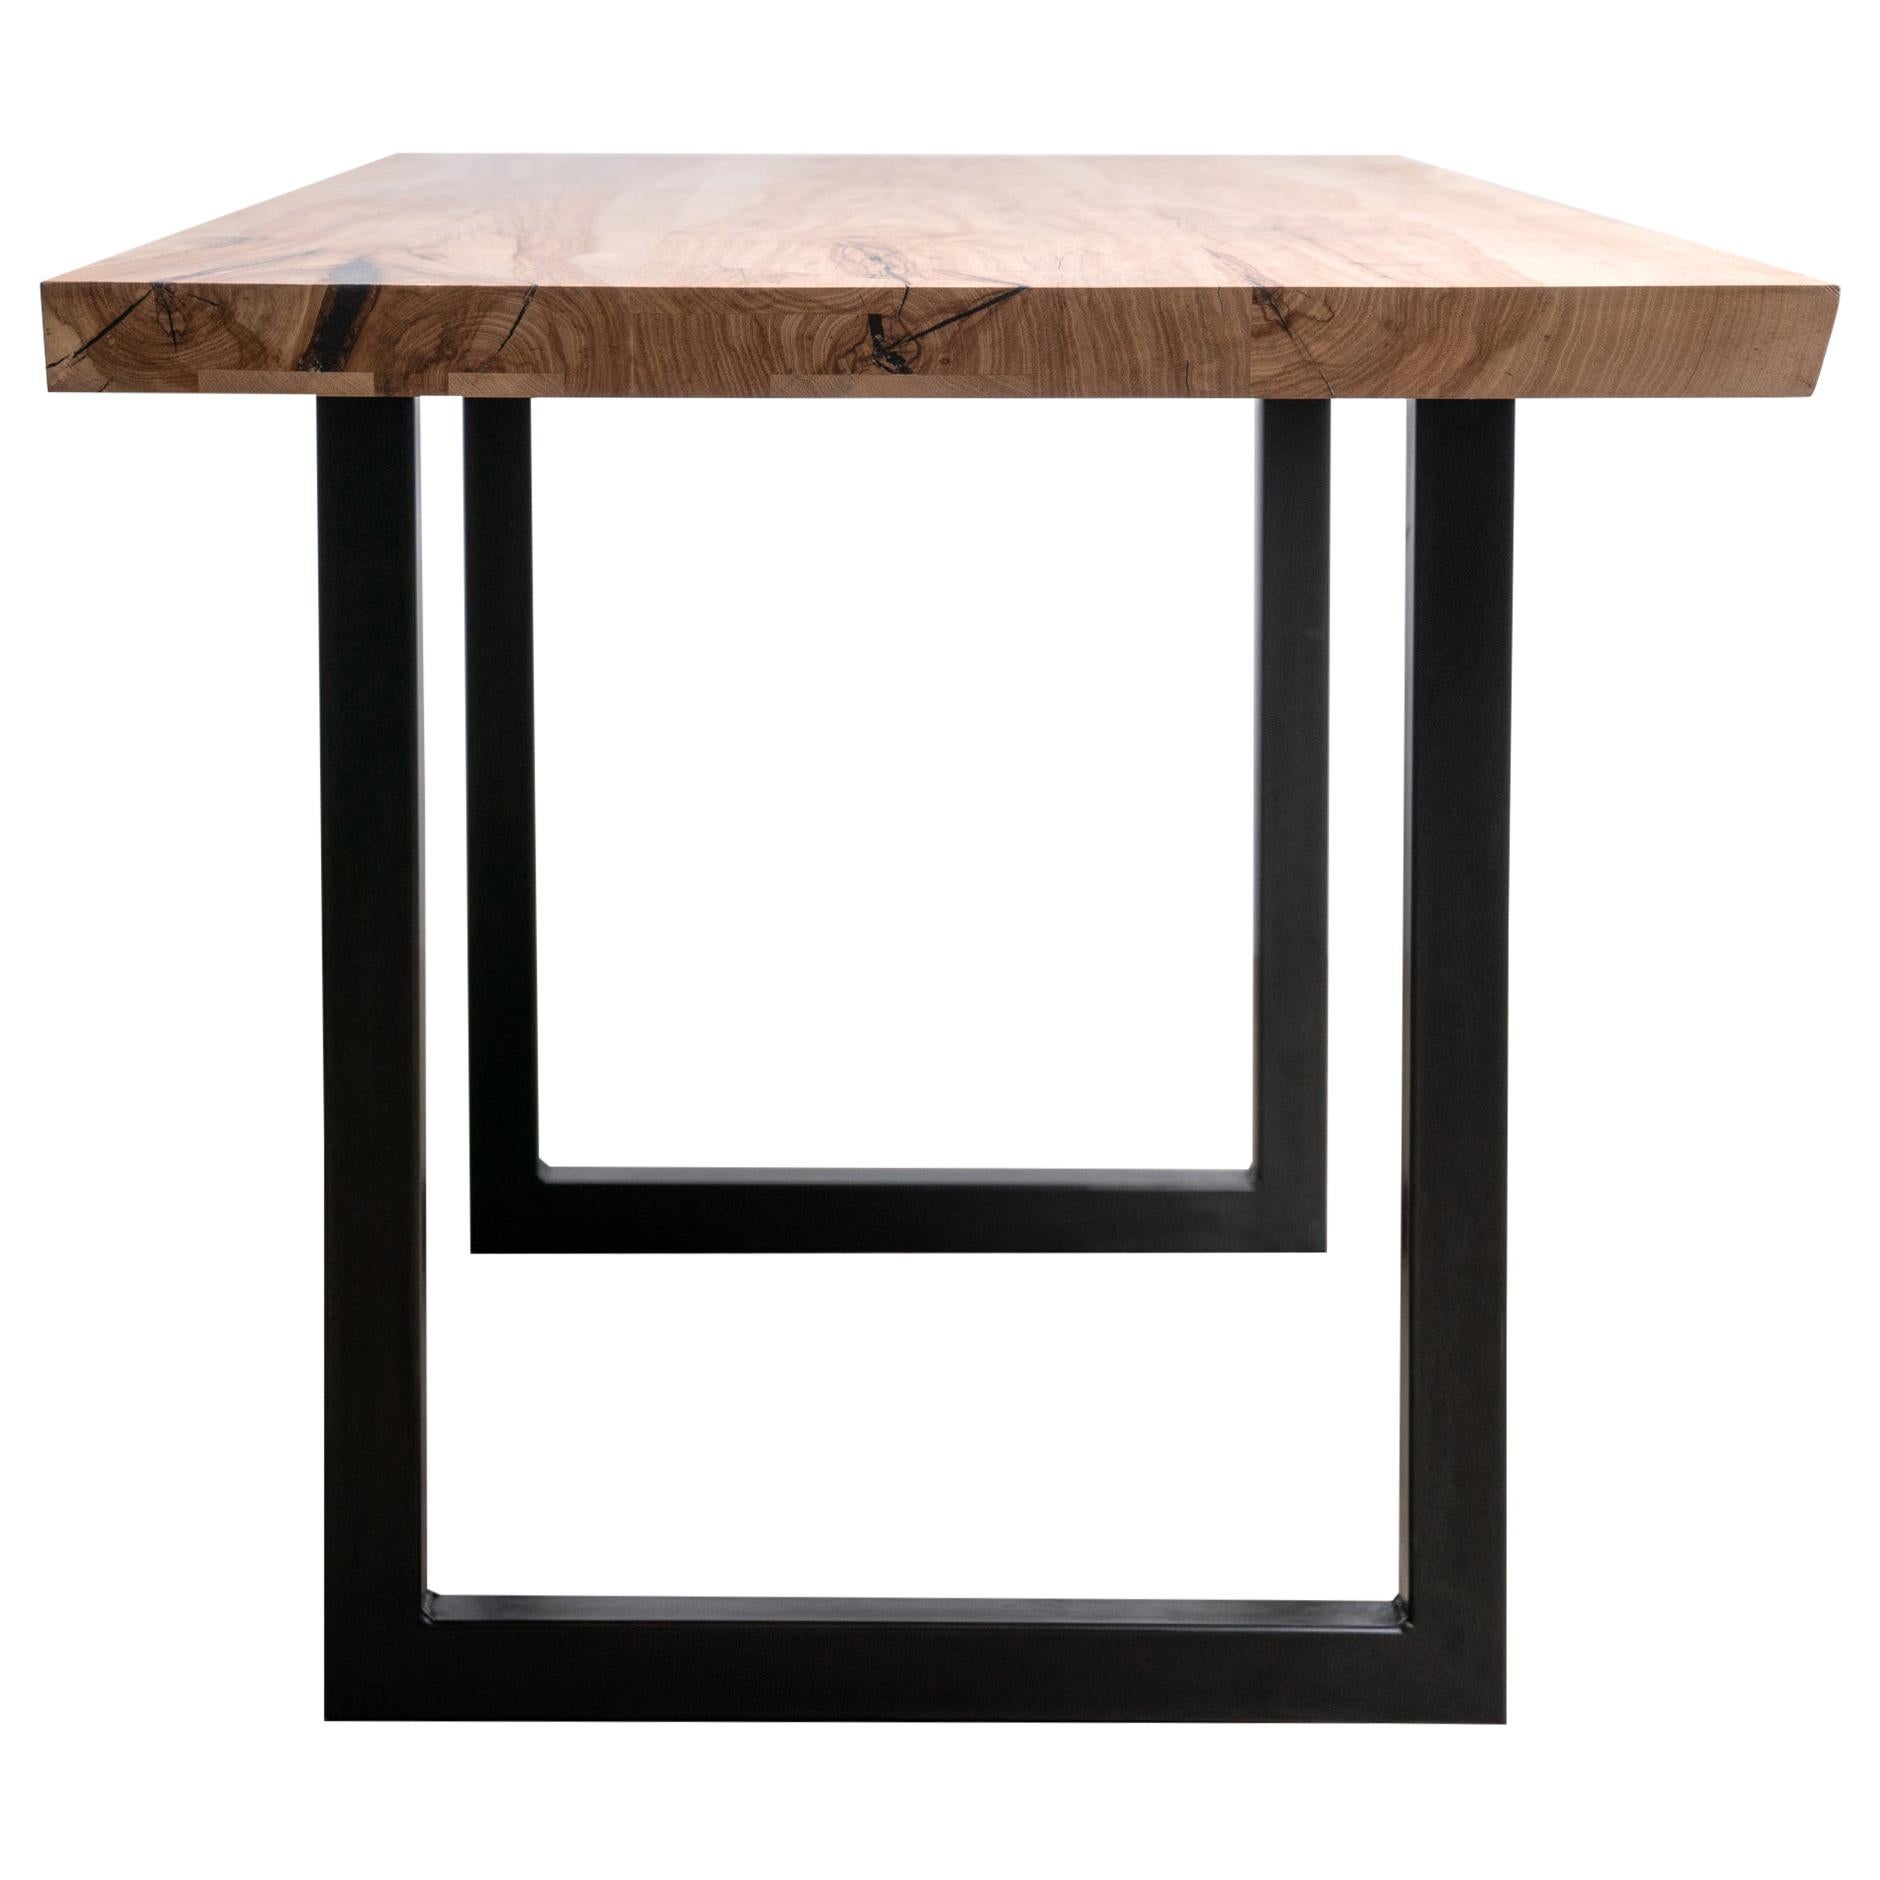 Live Edge Pecan Table Clear Finish on Modern Black Steel Square Base